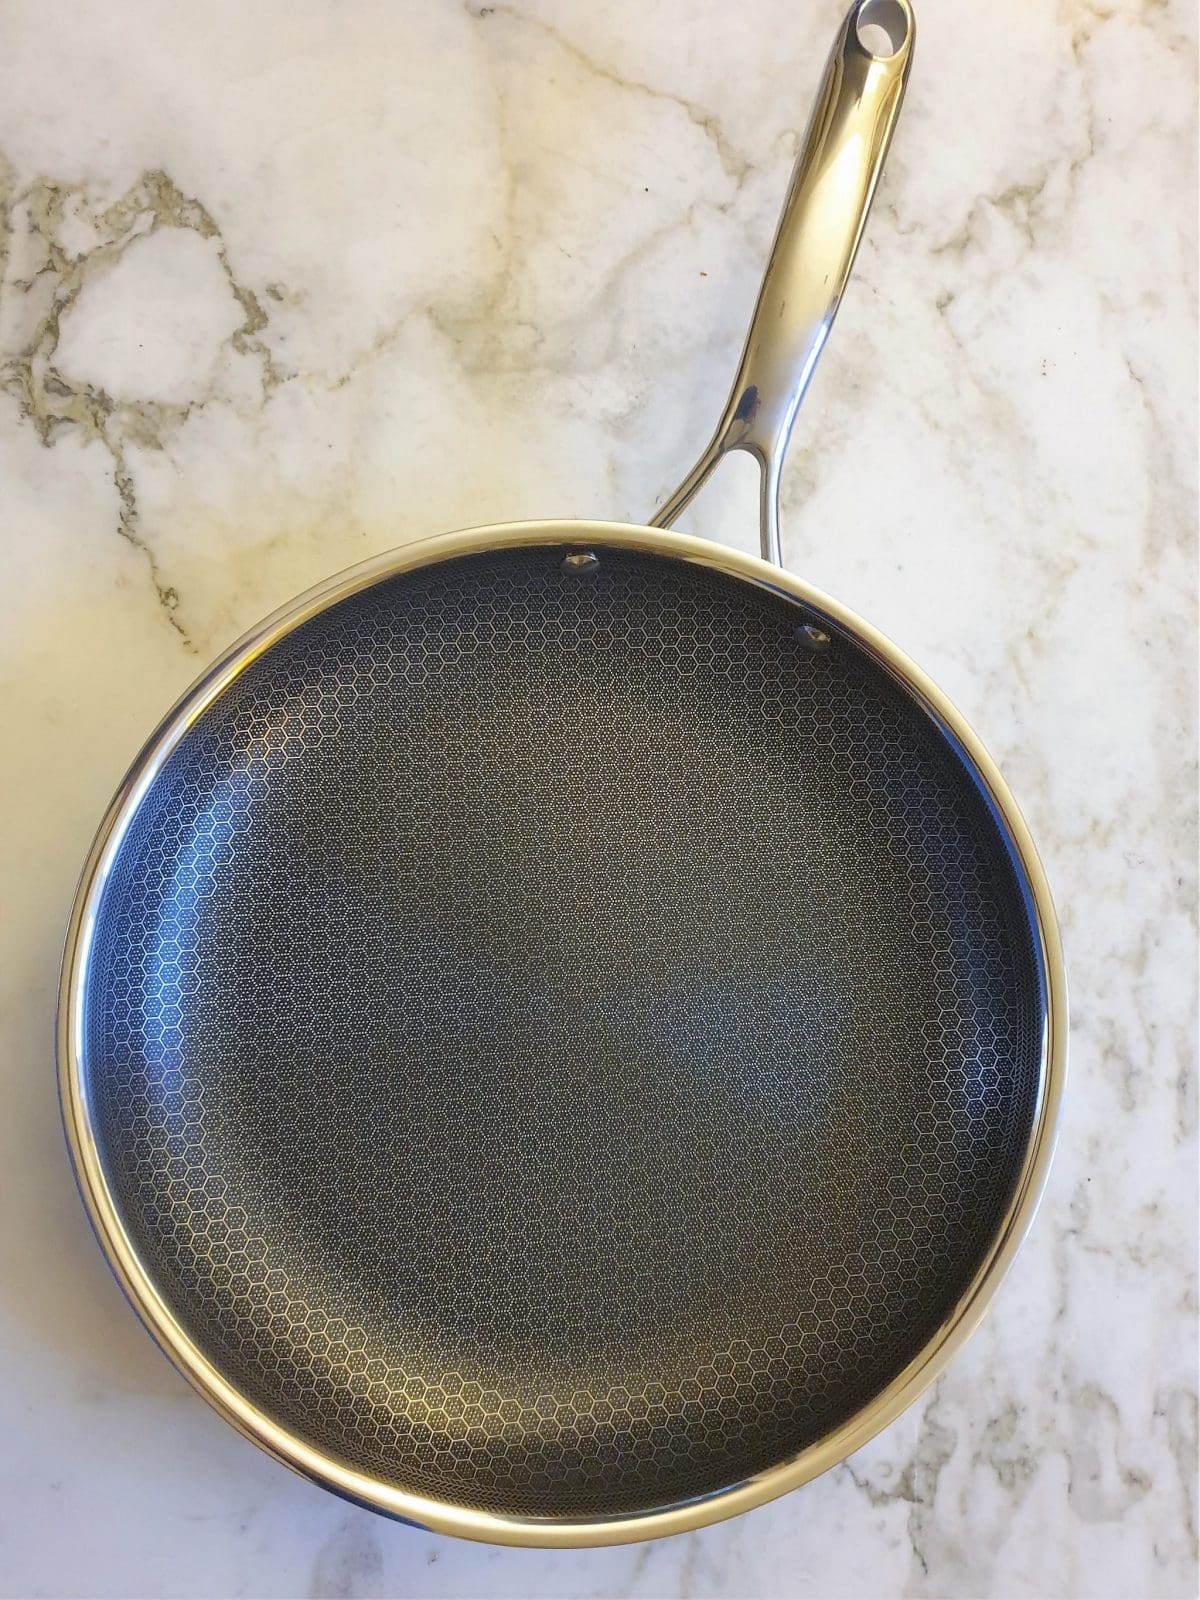 Gordon Ramsay Endorsed THESE Pans?! 2 Chefs Test HexClad Pans 